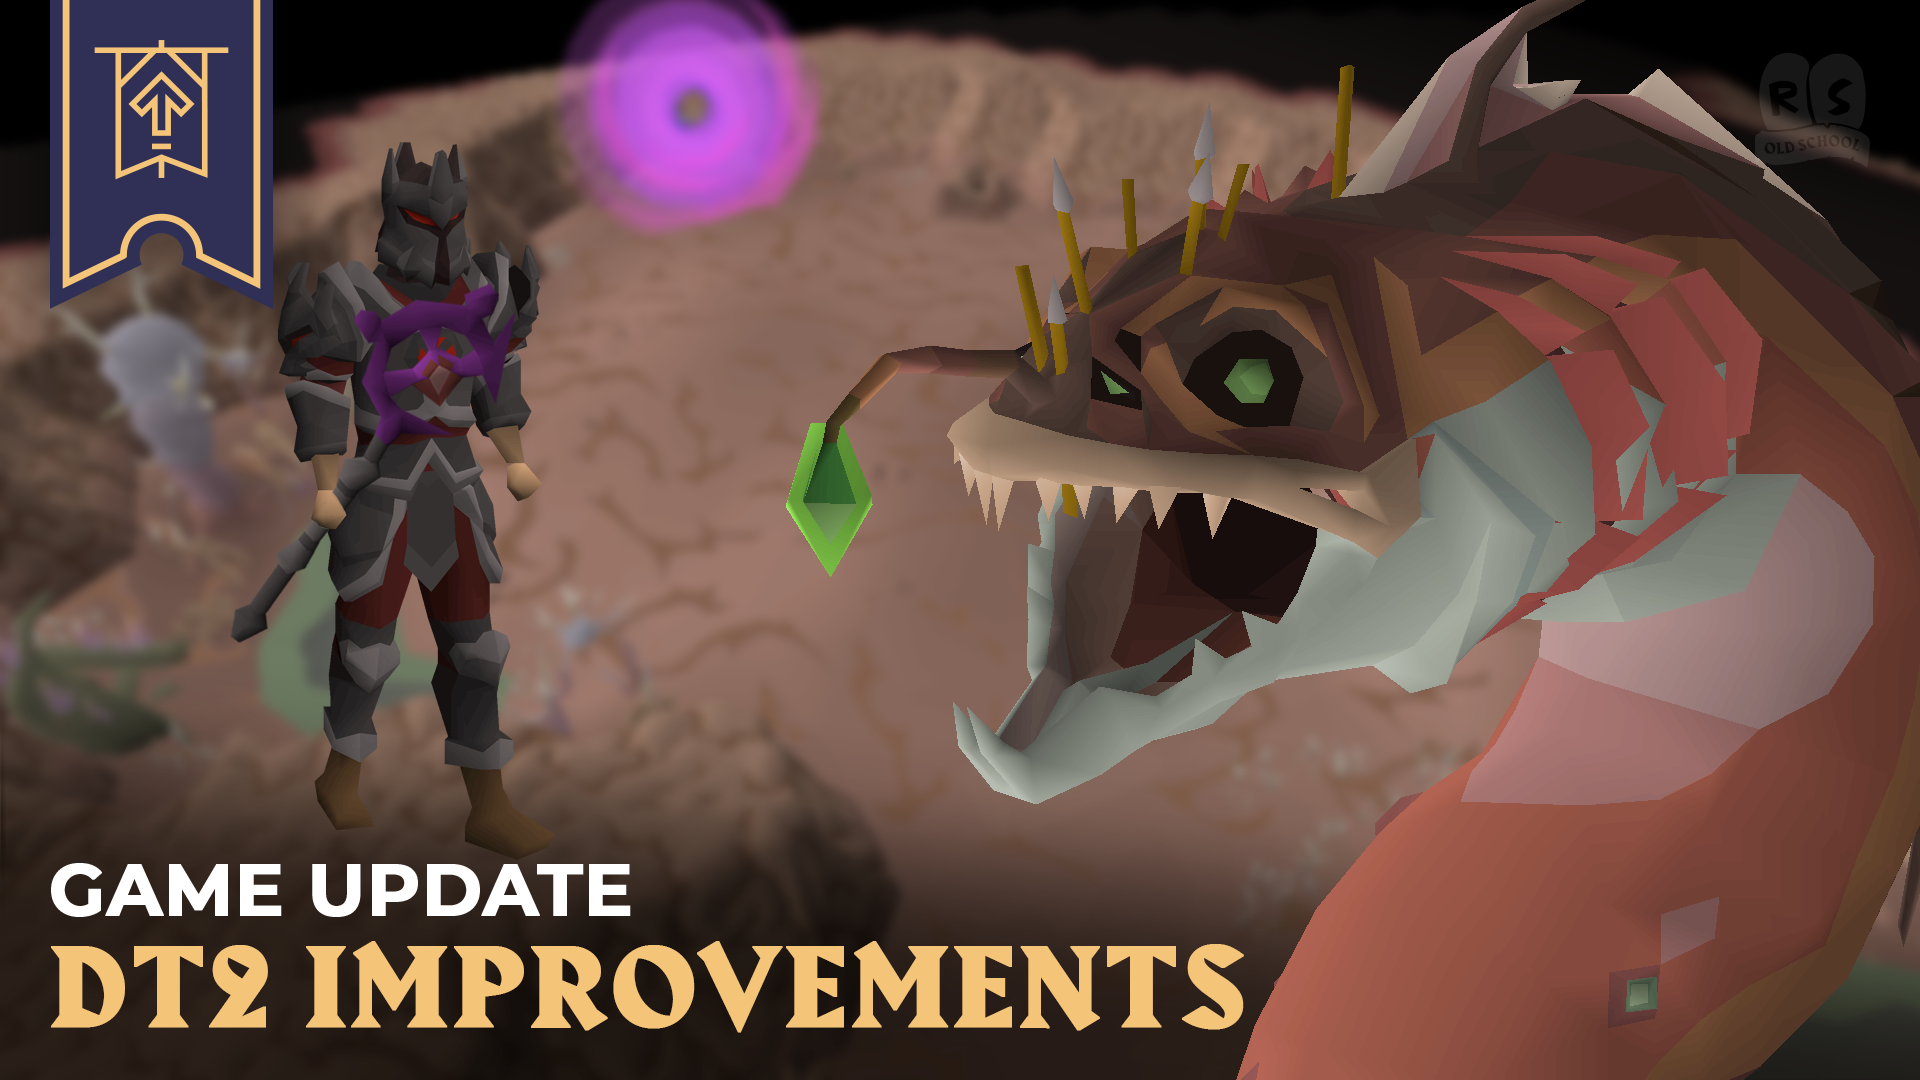 Old School RuneScape Plans Changes to Wilderness Boss Reworks After  Community Feedback